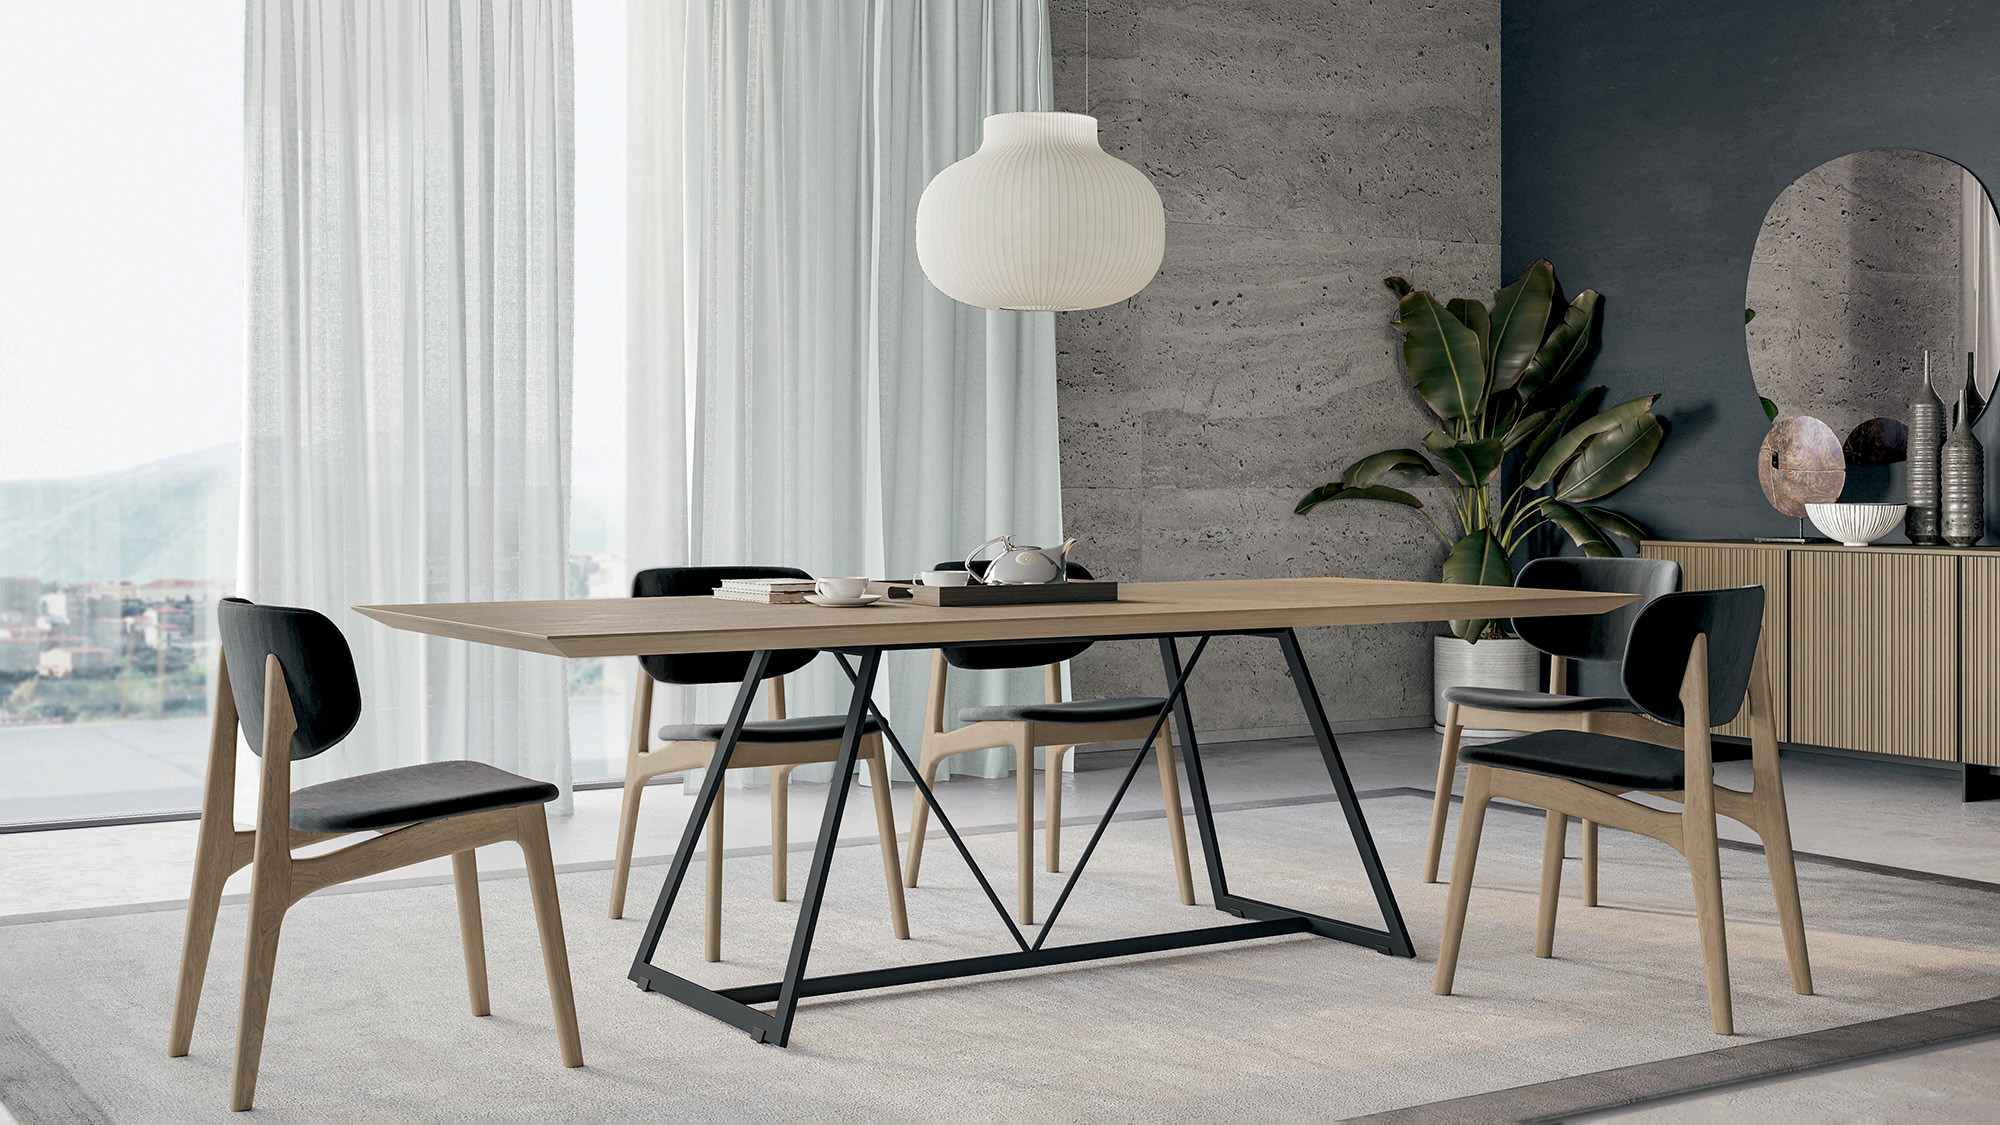 Radar table and Float chairs | Dallagnese